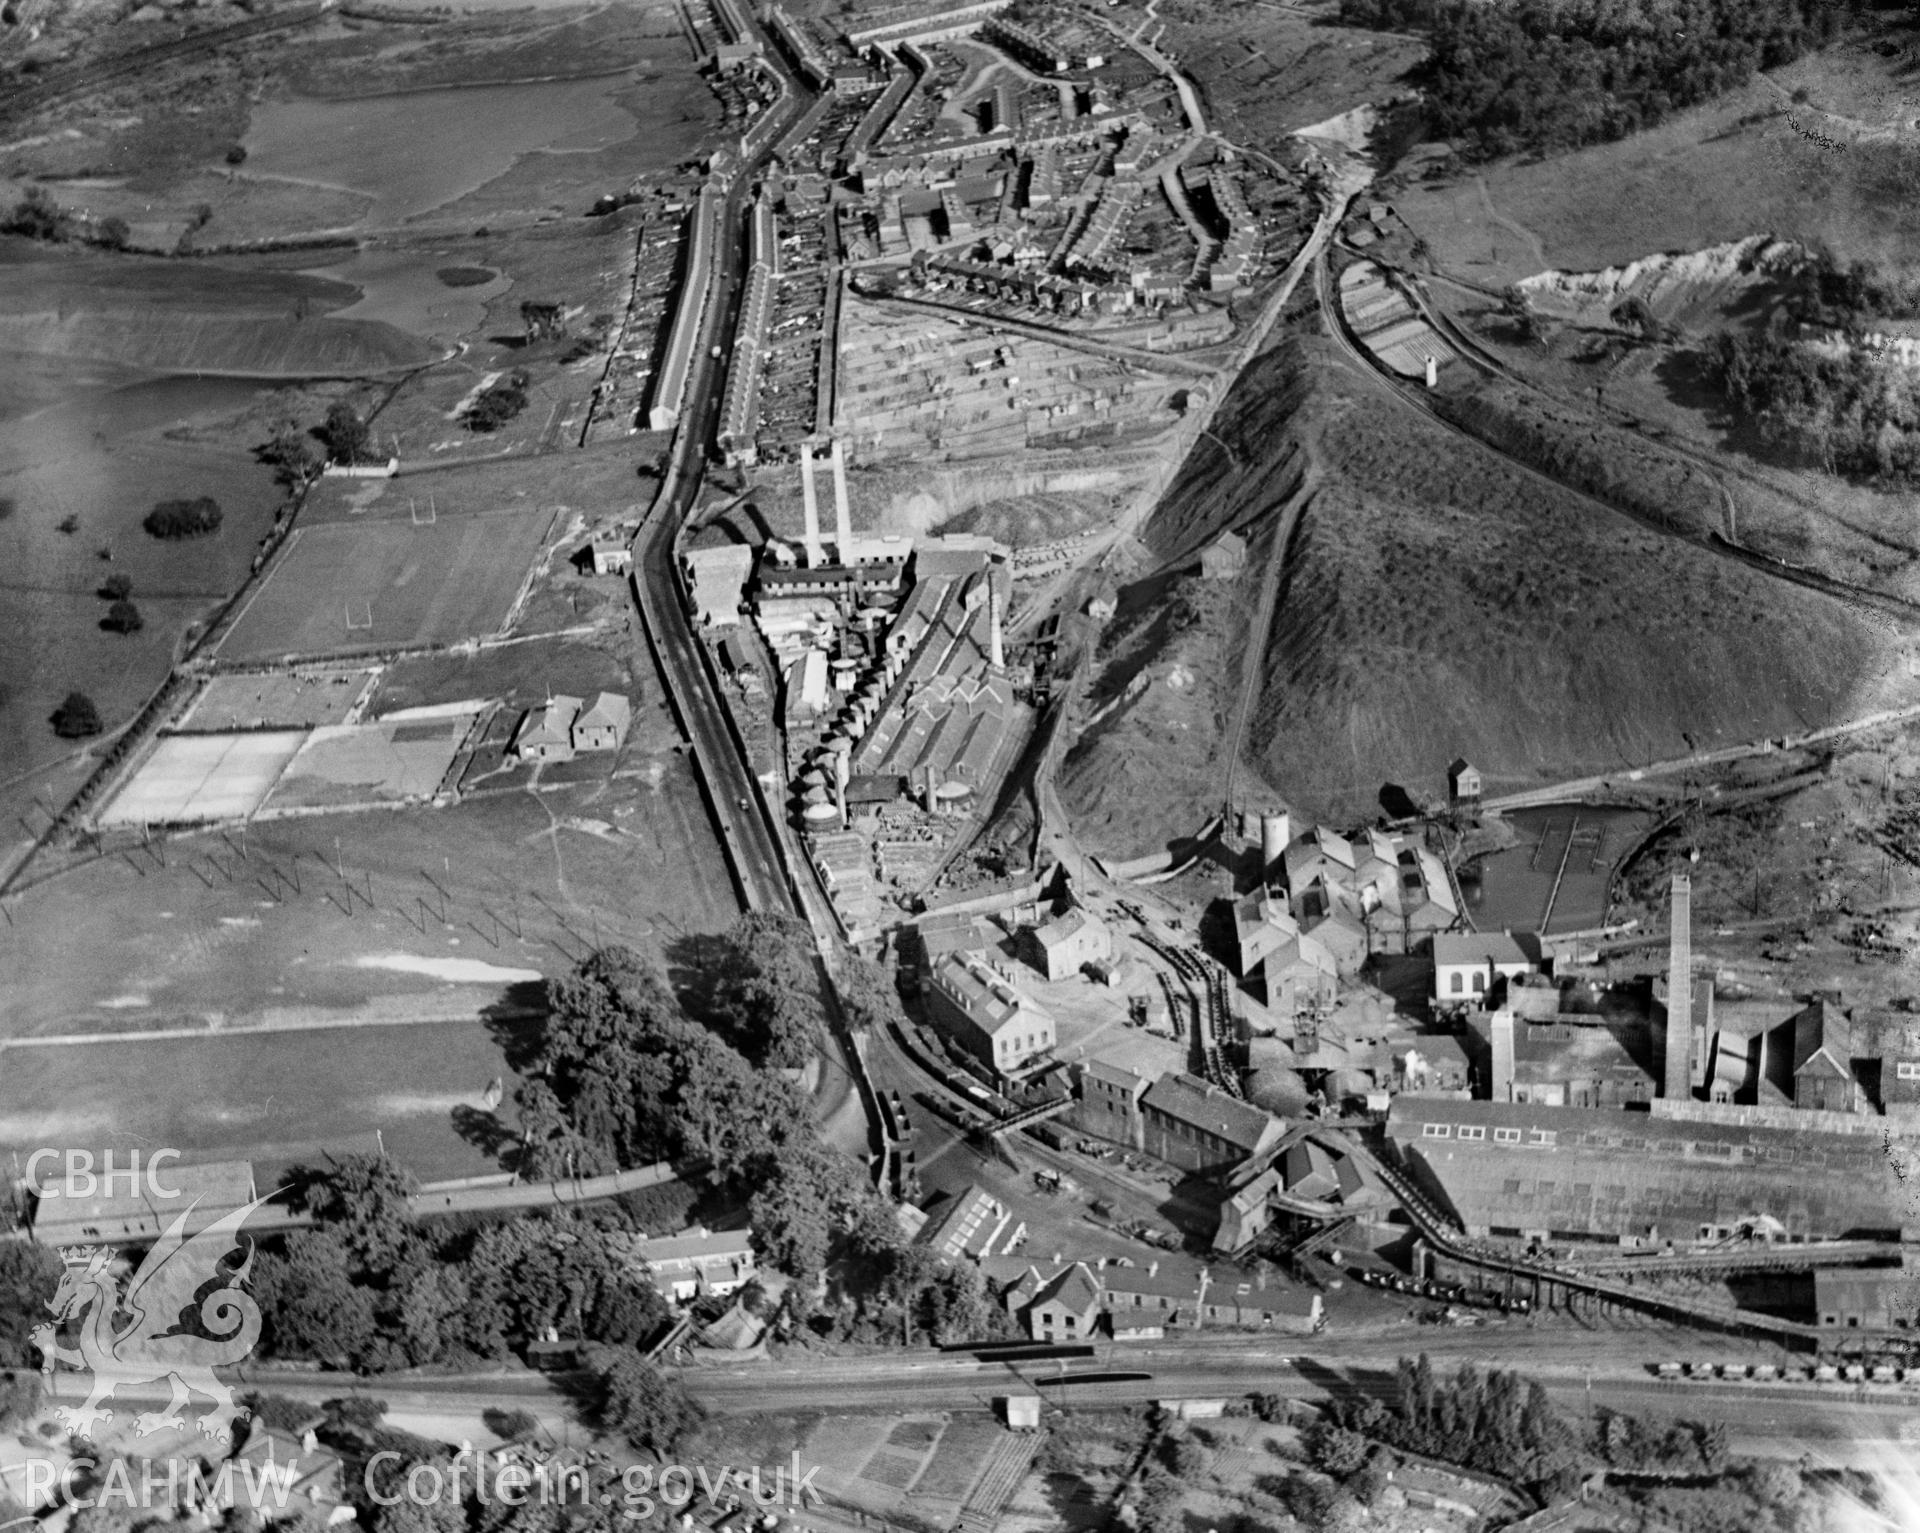 View of Powell Duffryn Steam Coal Co. (Britannia), Pengam, , including rugby ground, oblique aerial view. 5?x4? black and white glass plate negative.